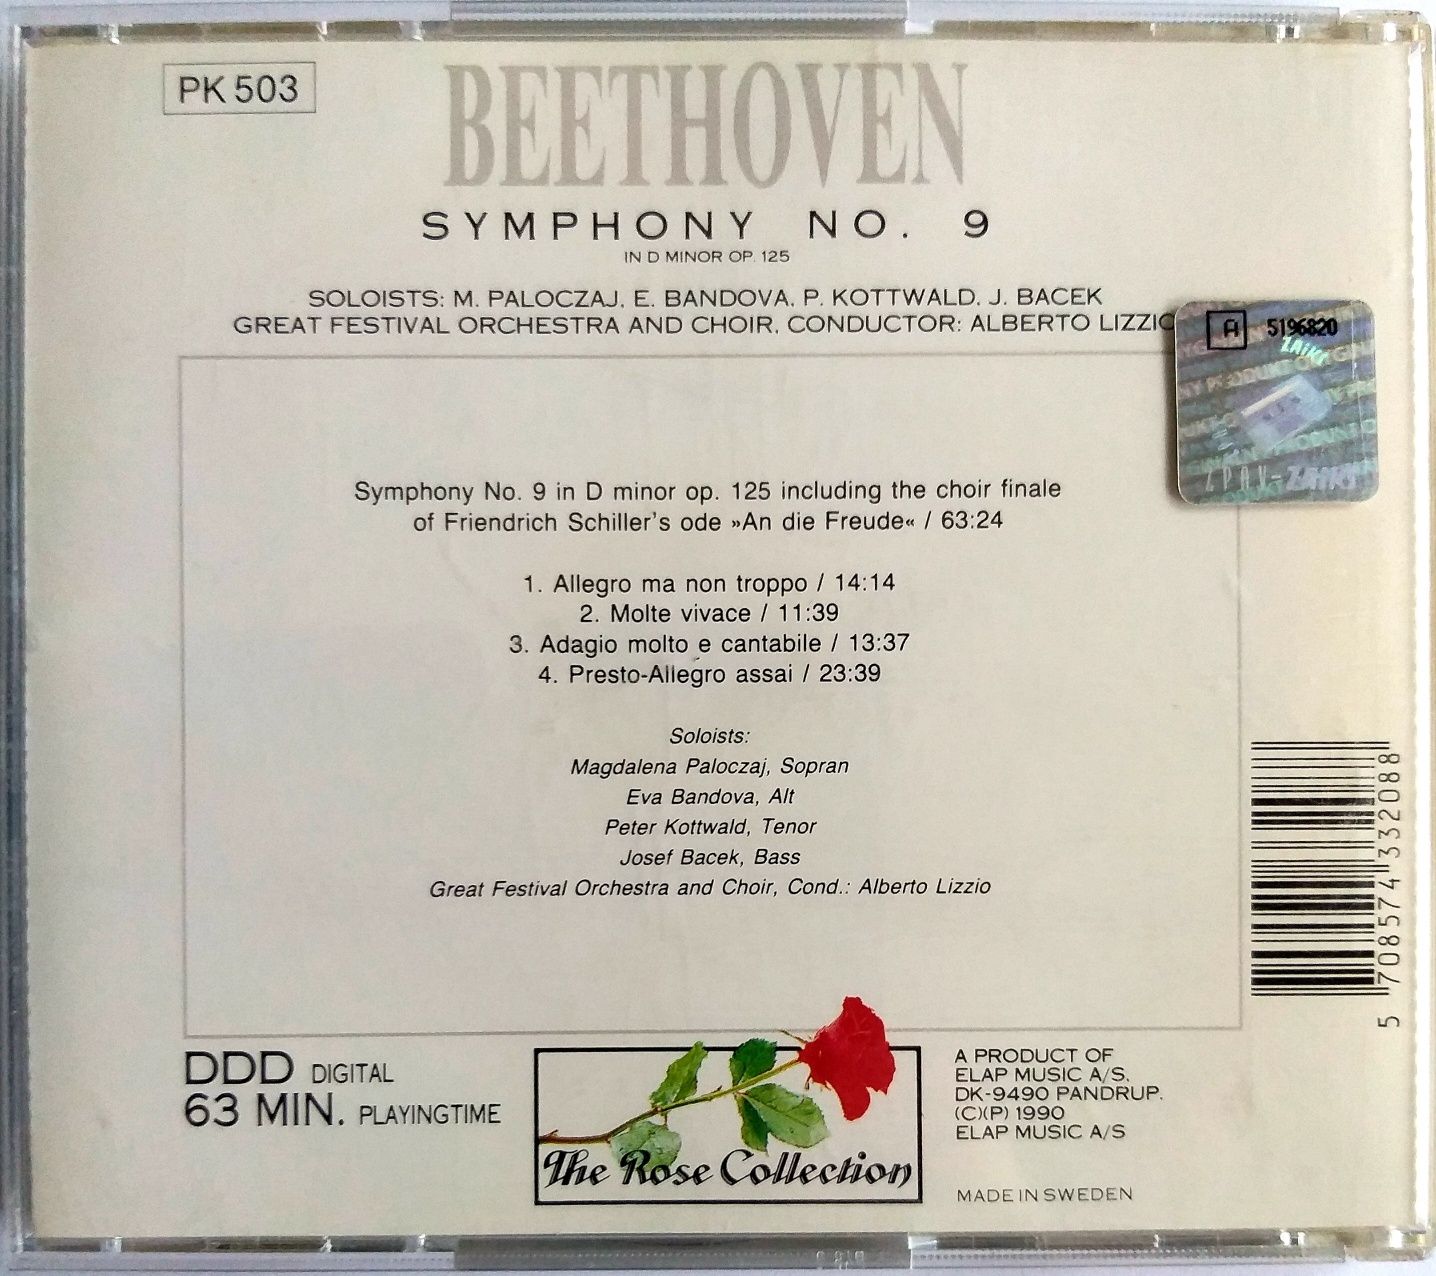 Beethoven Symhony no. 9 The Rose Collection 1990r